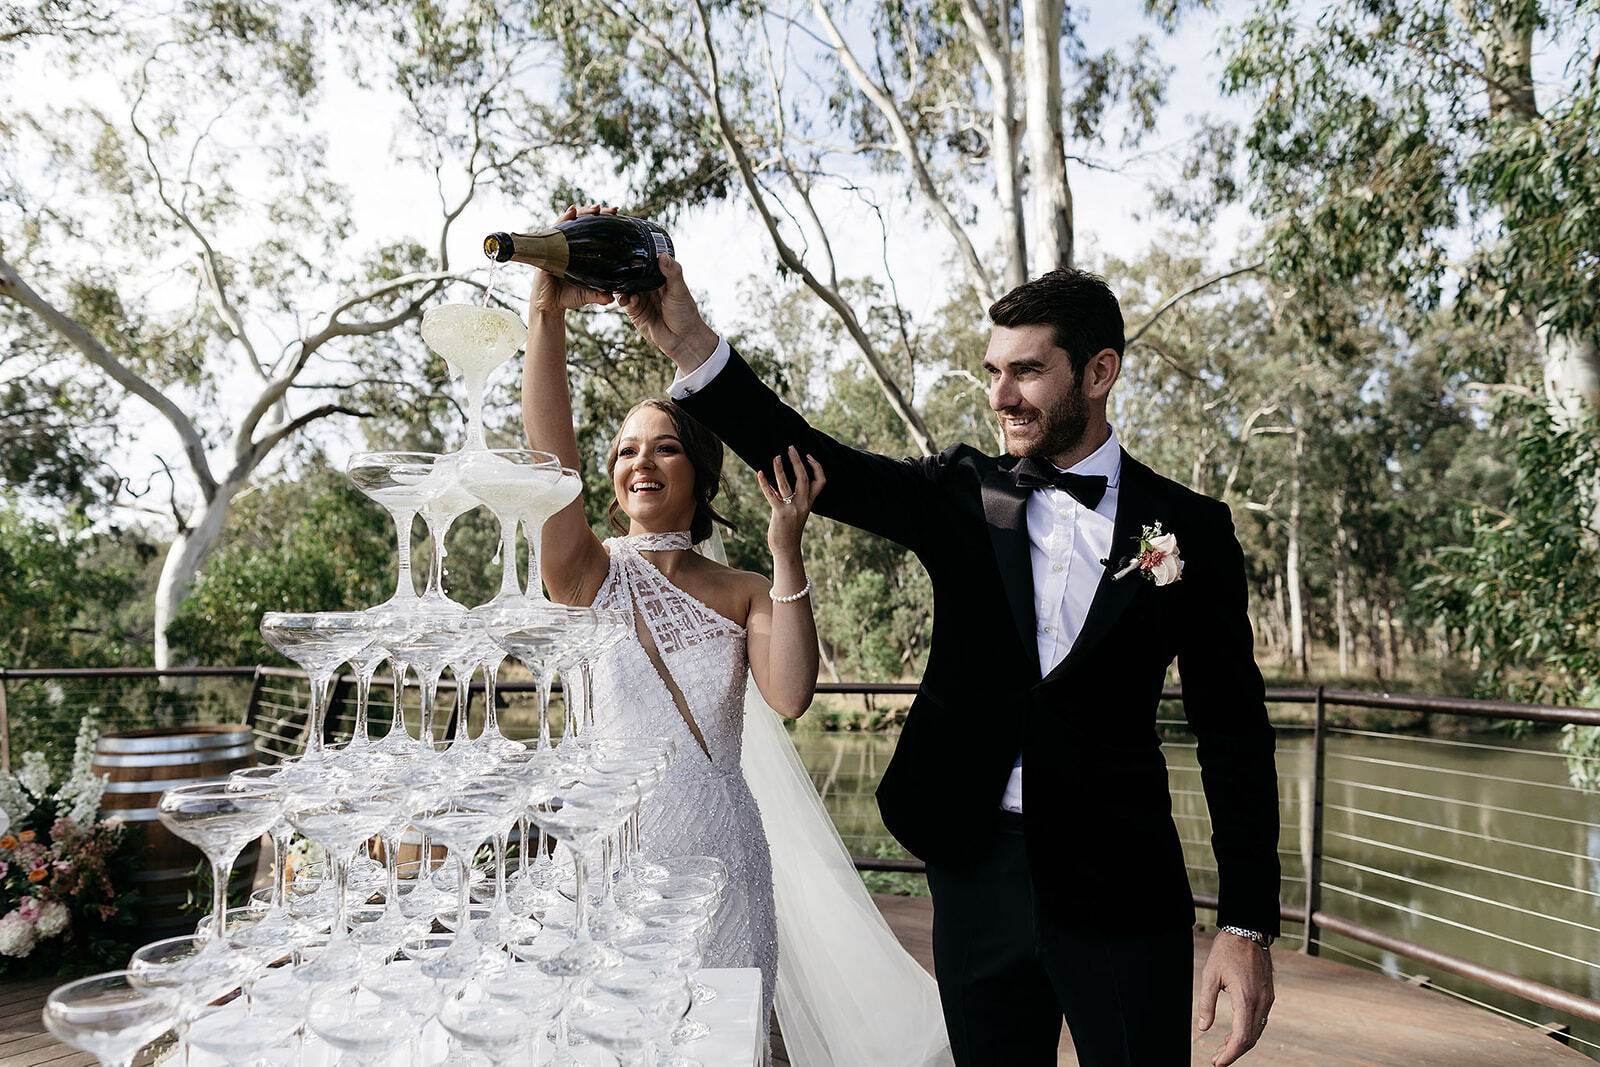 Champagne tower image by Ali Bailey Photography at venue Mitchelton Wines